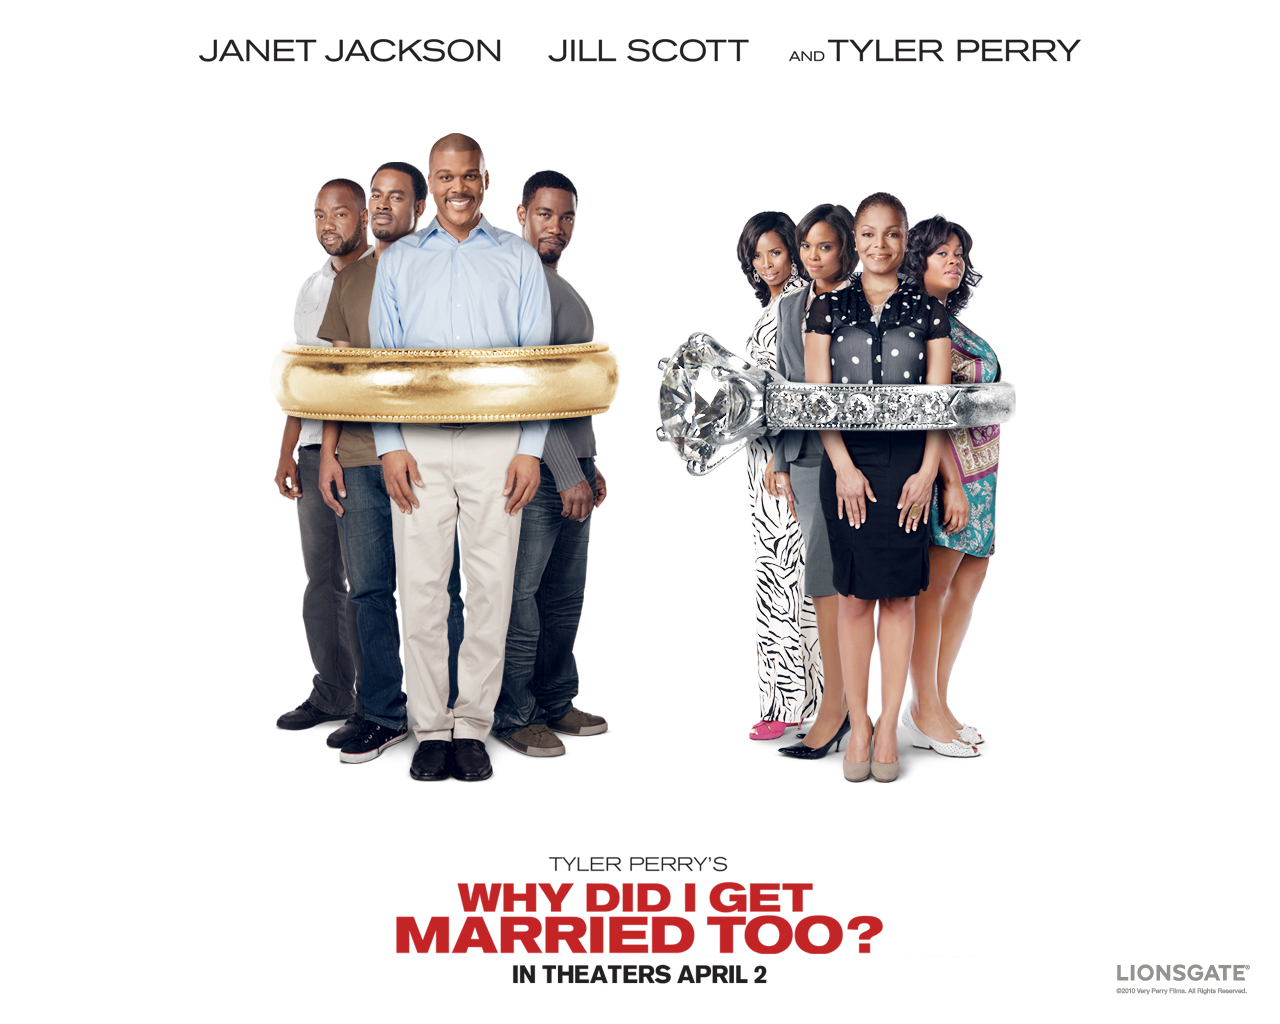 Tyler Perry’s Why Did I Get Married Too!